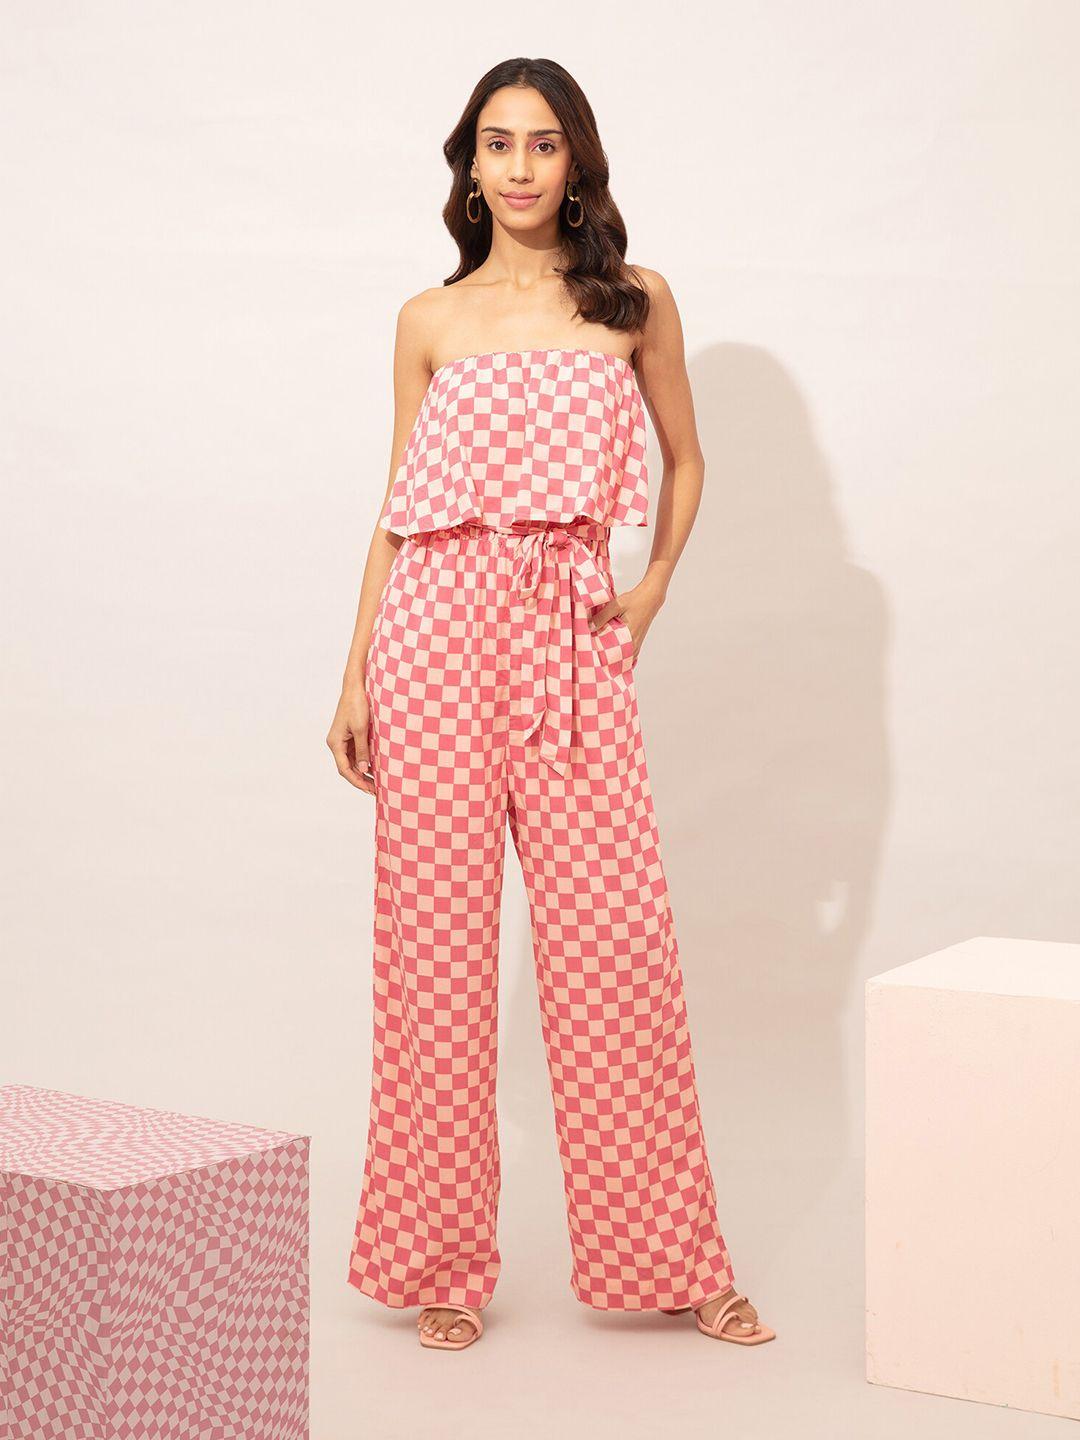 20dresses printed strapless checked basic jumpsuit